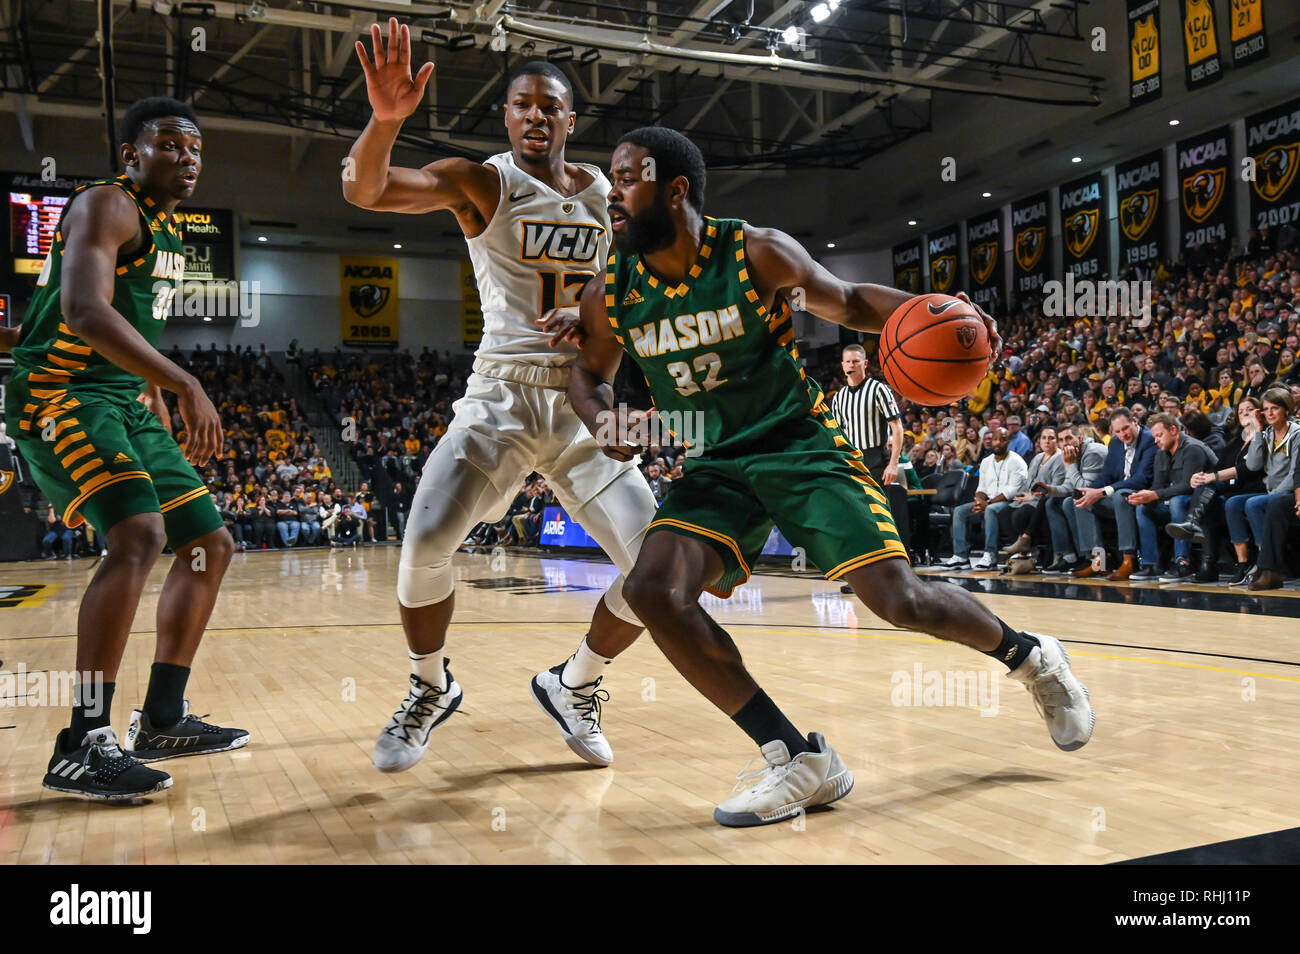 Richmond, Virginia, USA. 2nd Feb, 2019. George Mason Guard IAN BOYD (32) drives to the basket against MALIK CROWFIELD (13) during the game held at the Siegal Center Center in College Park, Maryland. Credit: Amy Sanderson/ZUMA Wire/Alamy Live News Stock Photo